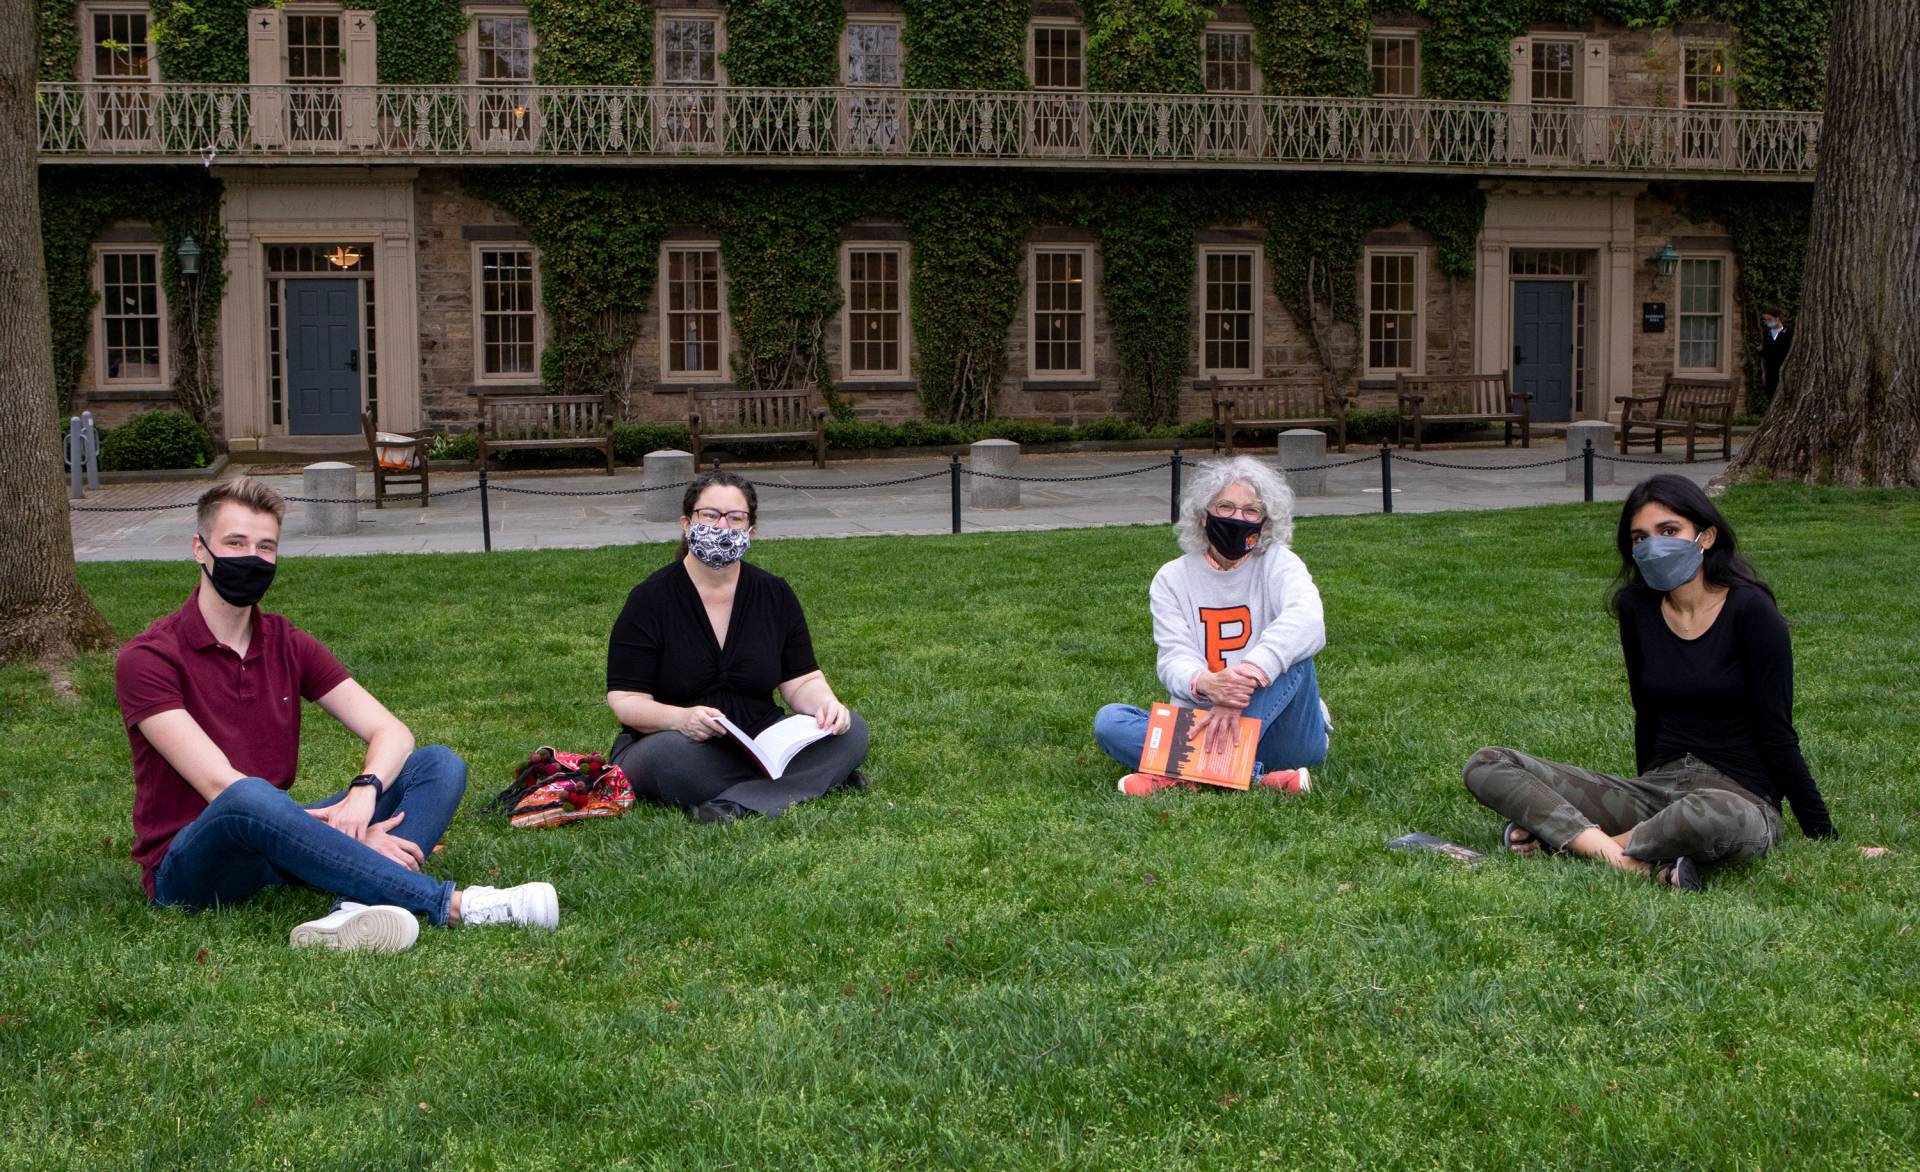 Jill Dolan holds a precept on the lawn outside Morrison Hall with with Beth Stroud and 2 students